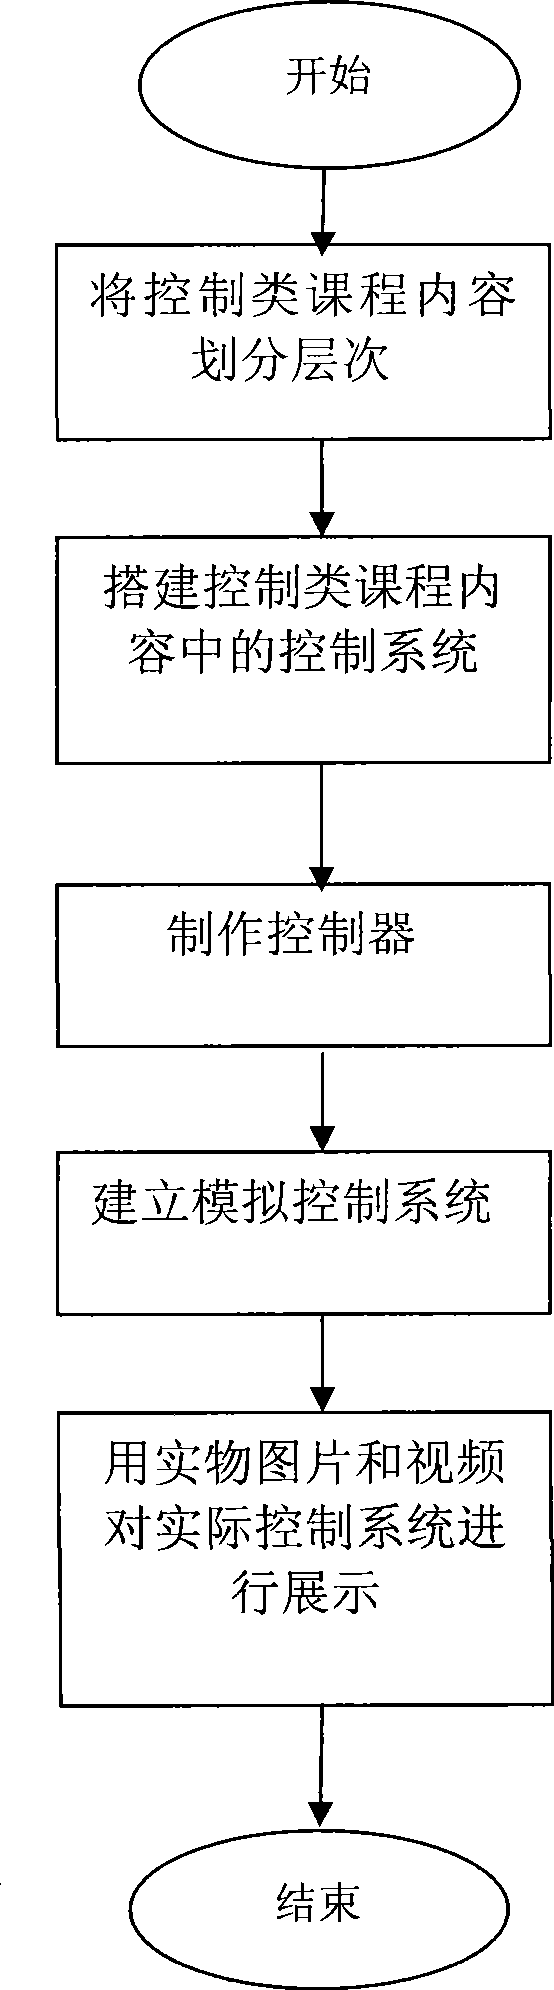 Method and system for control type course teaching demonstration